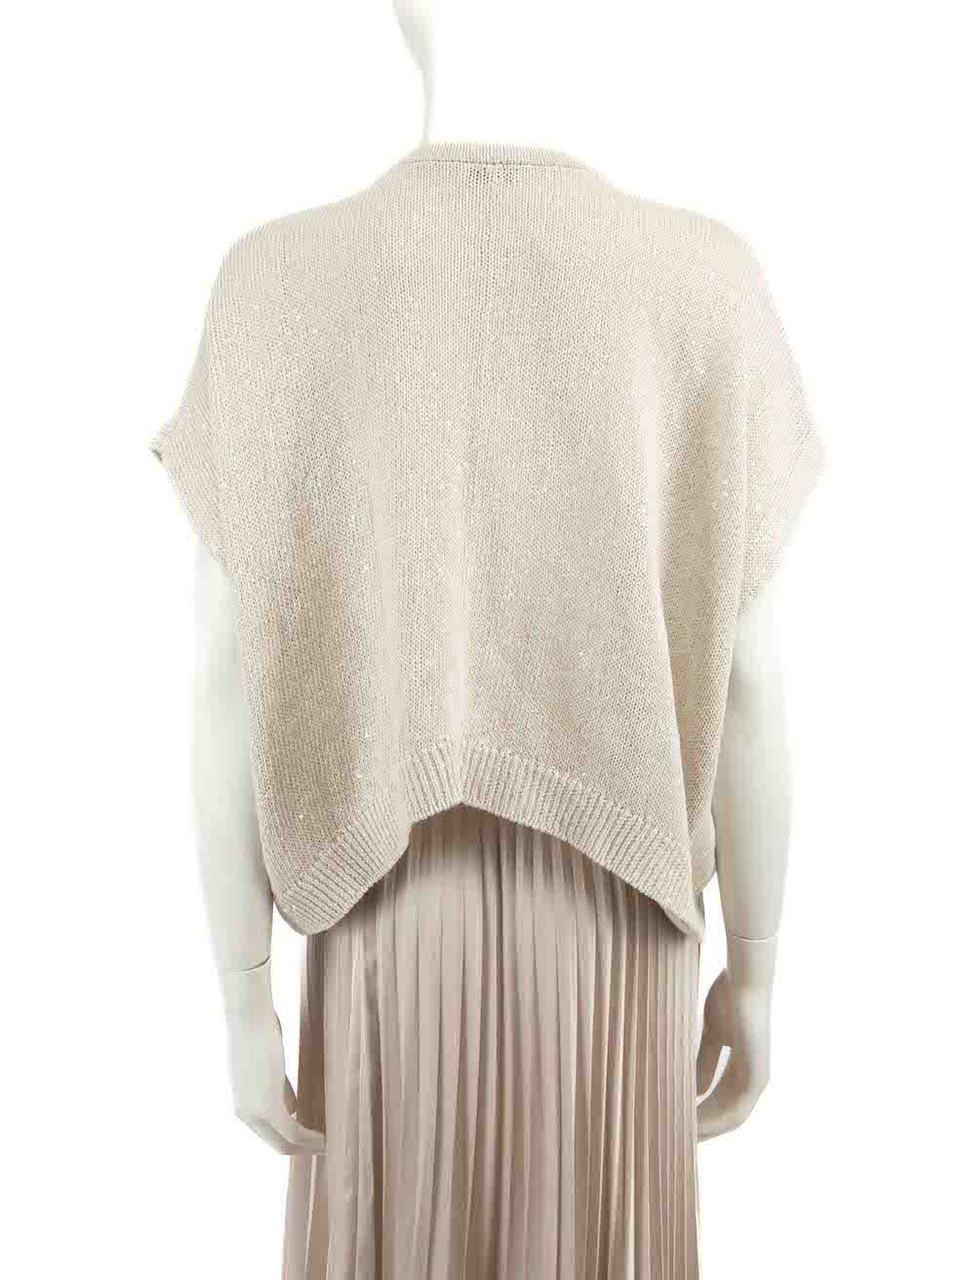 Brunello Cucinelli Ecru Knit Sequinned Cardigan Size M In Good Condition For Sale In London, GB